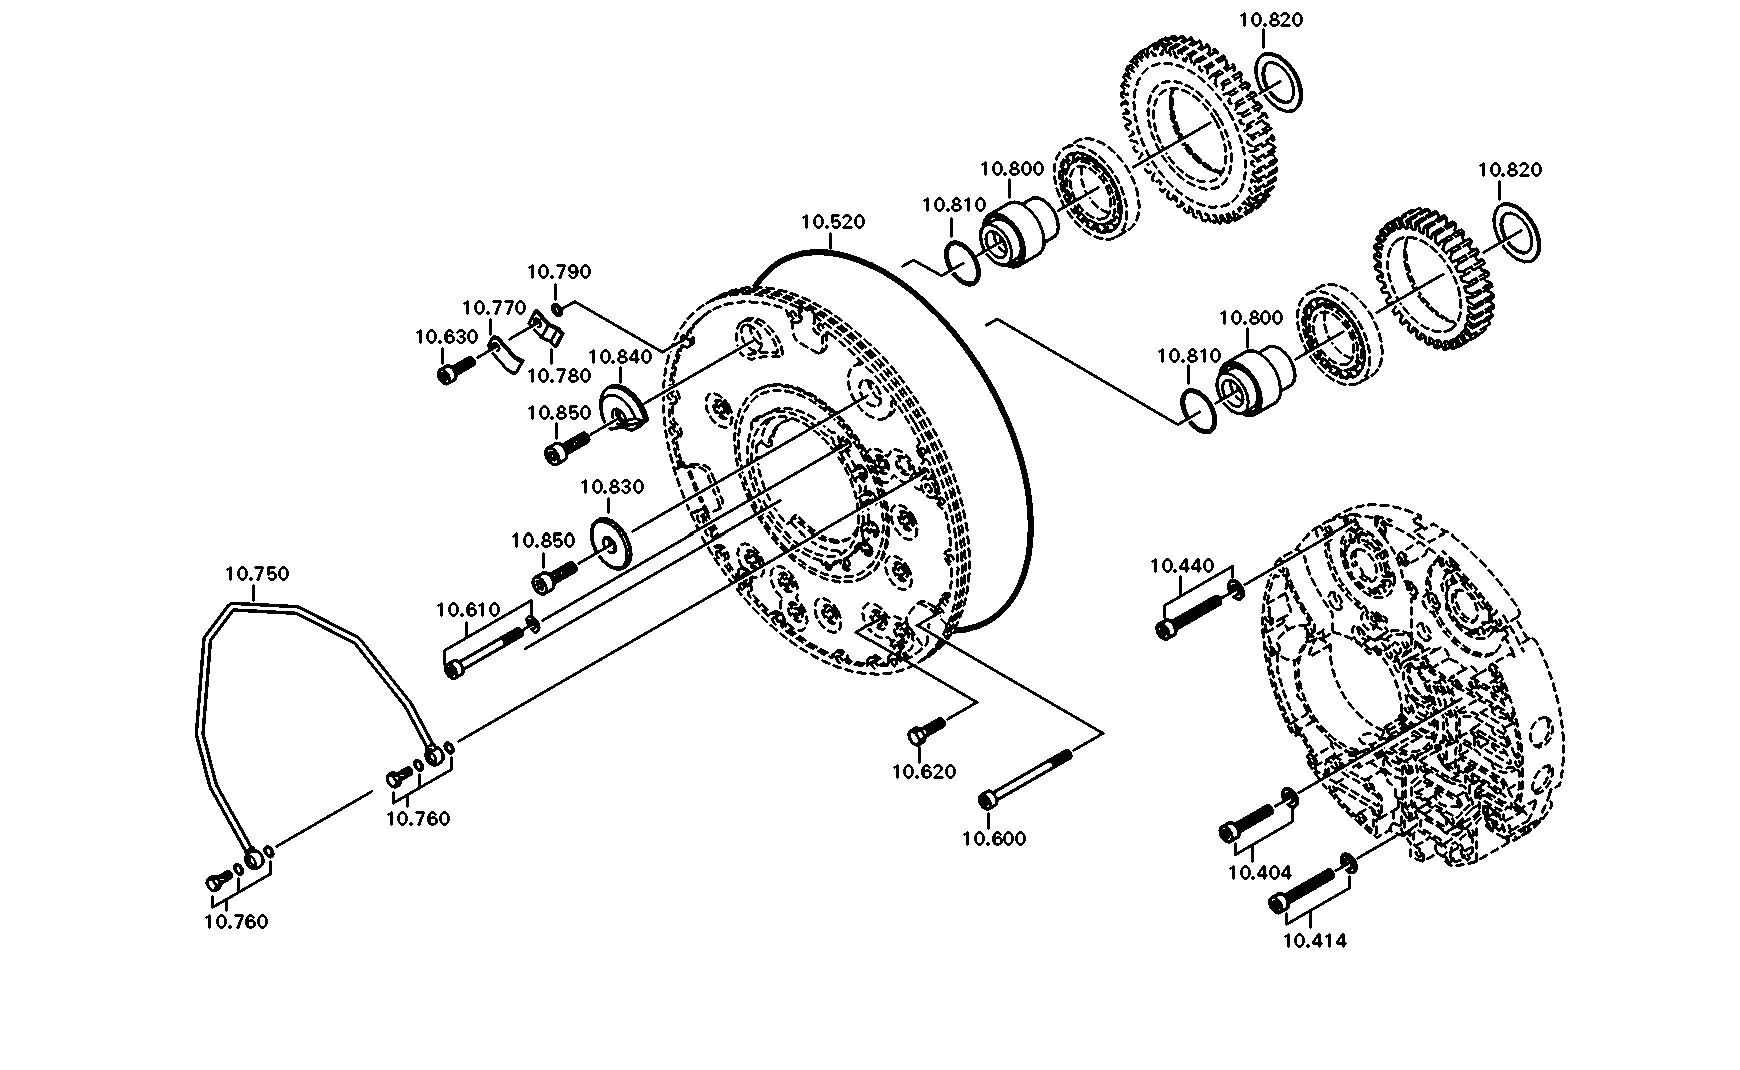 drawing for LIEBHERR GMBH 10028176 - TUBE (figure 4)